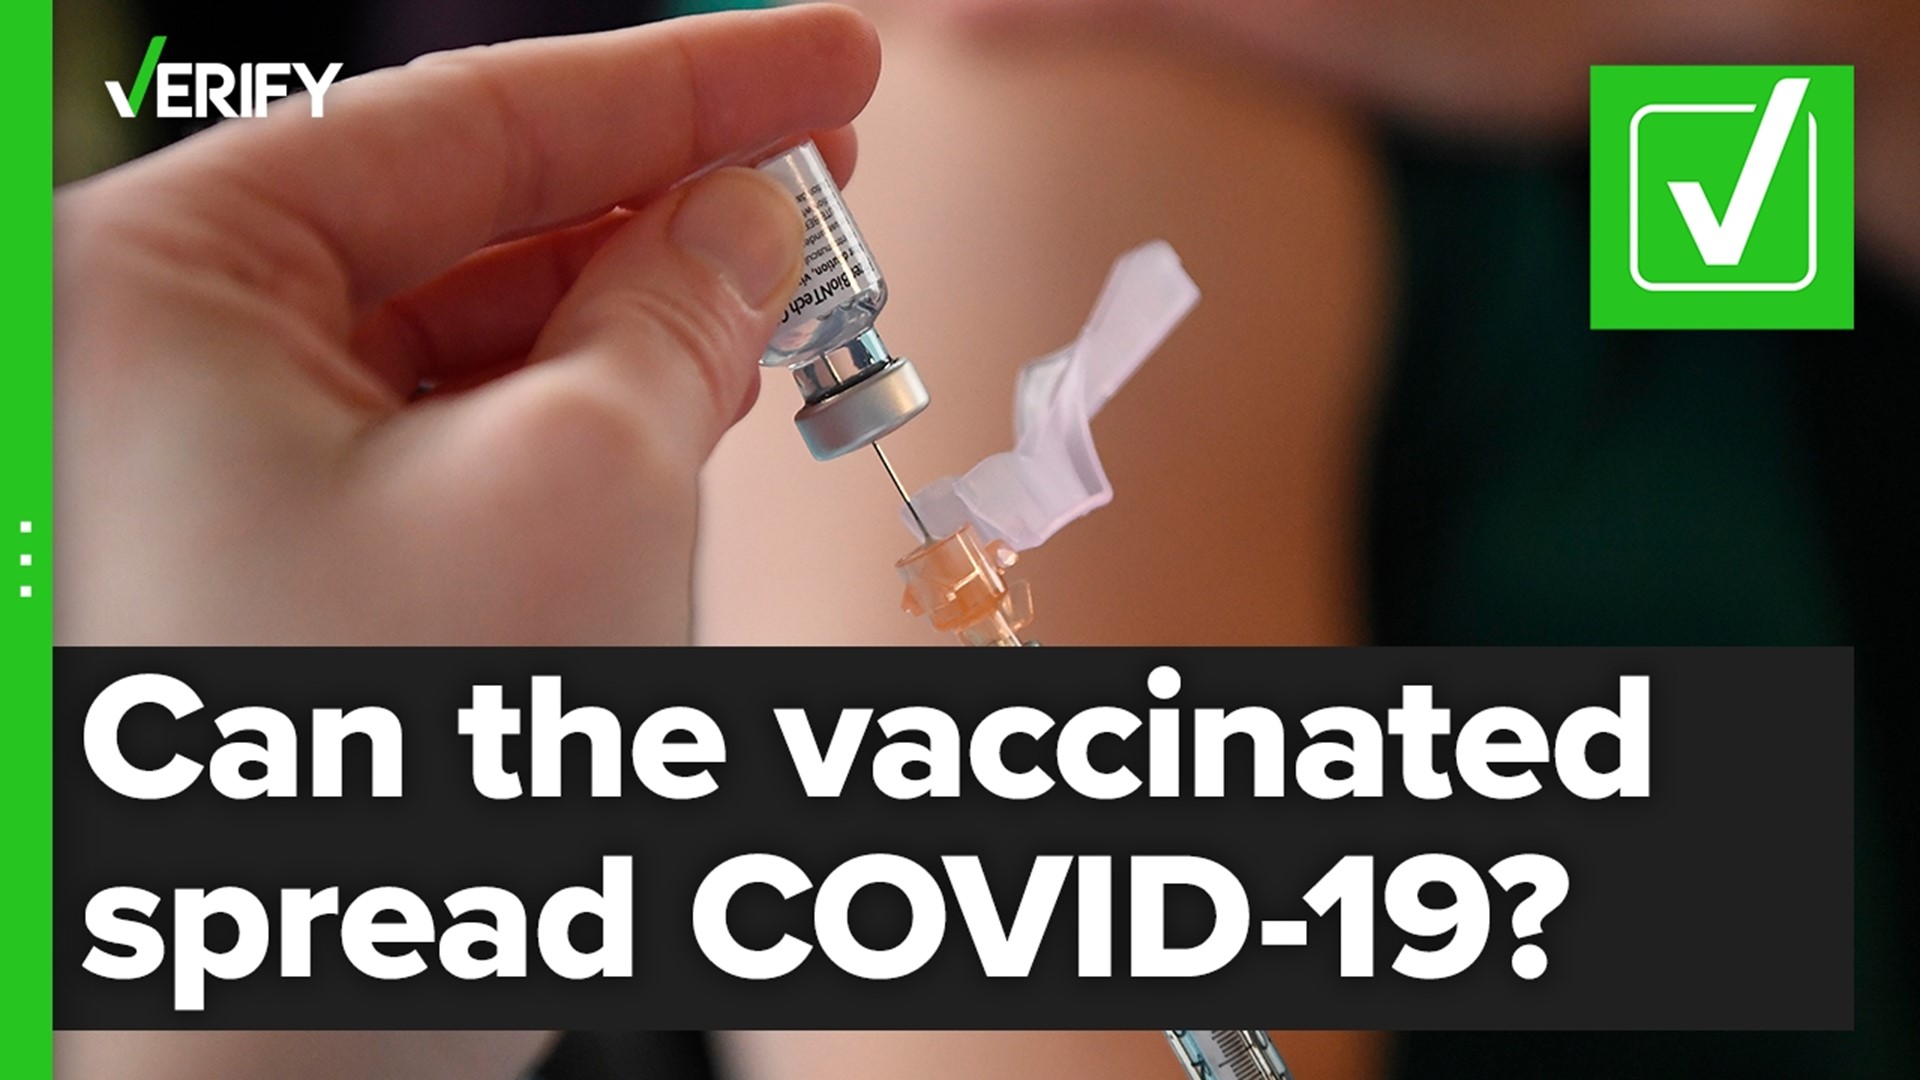 Can vaccinated people spread COVID-19 to others? The VERIFY team confirms this is true.